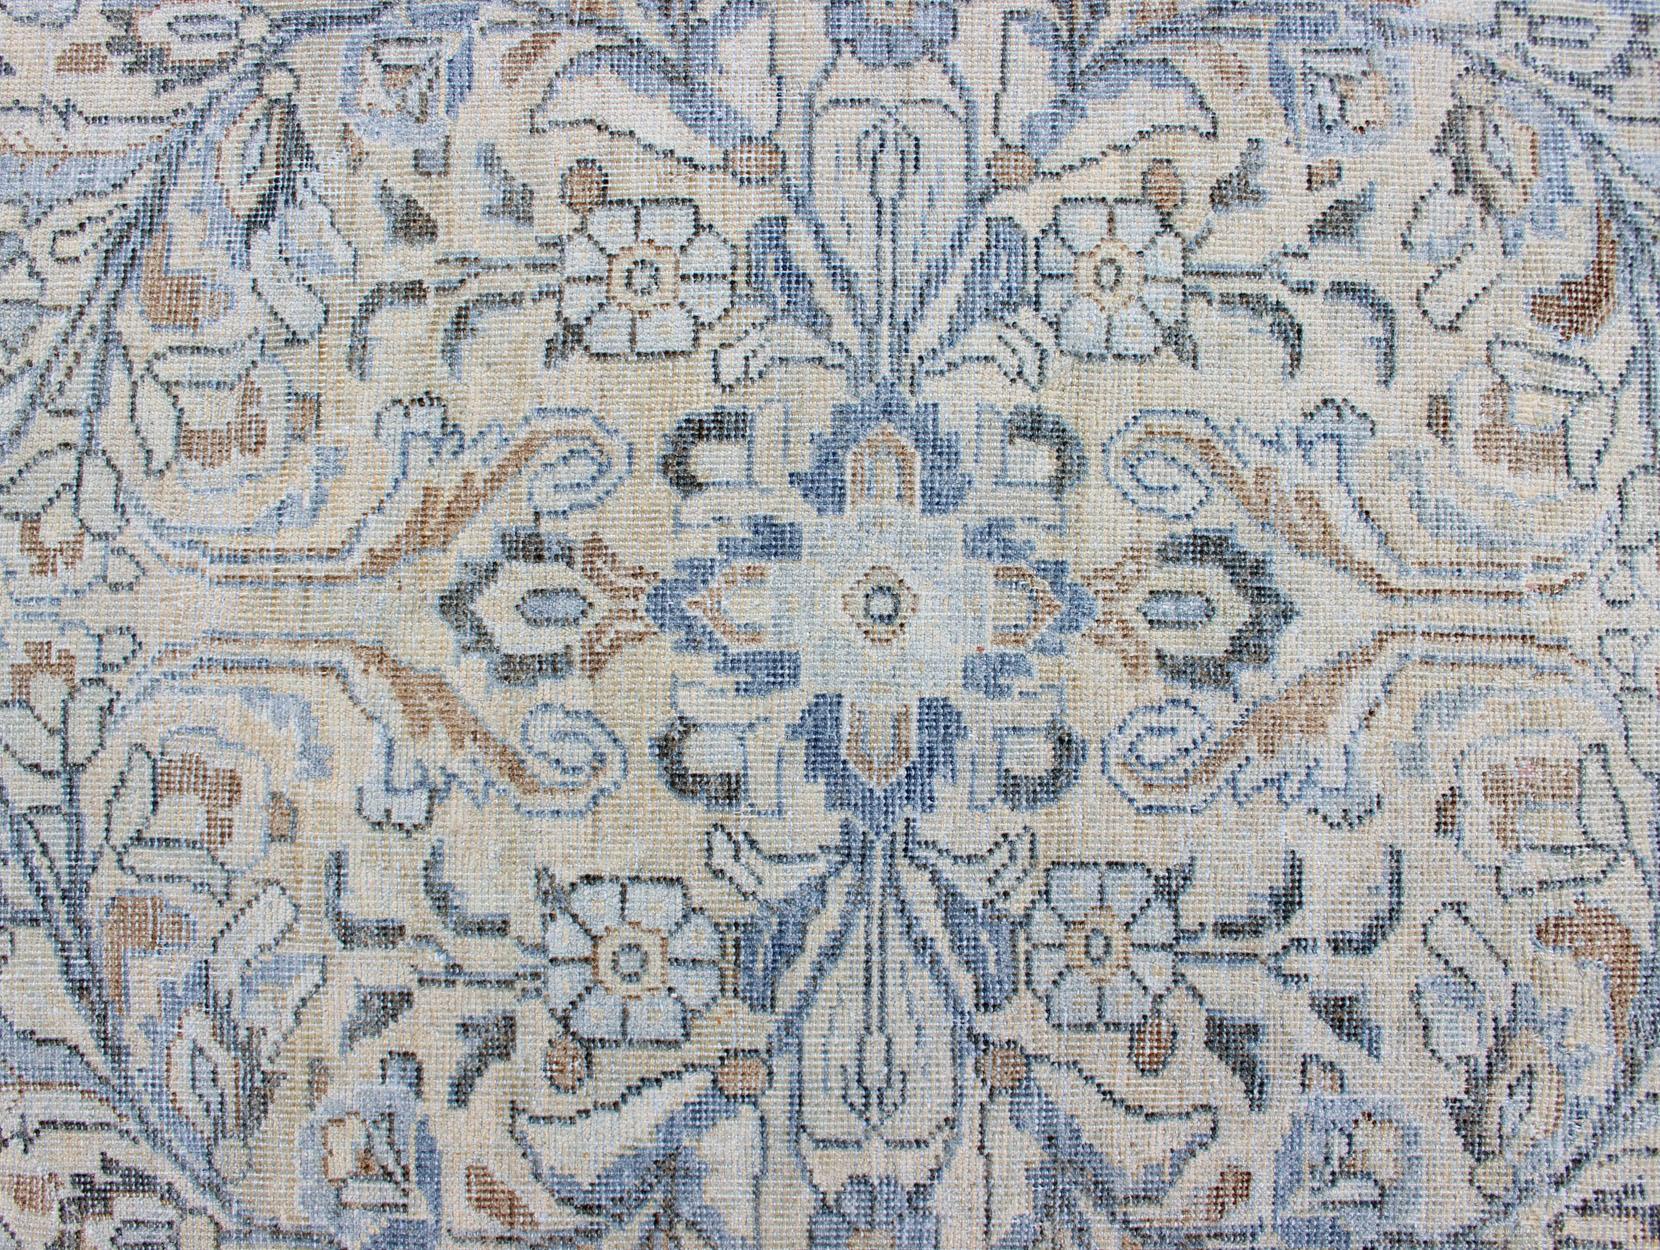 Antique Persian Mahal Rug with Sub Floral Design in Blue, Charcoal & Cream 10